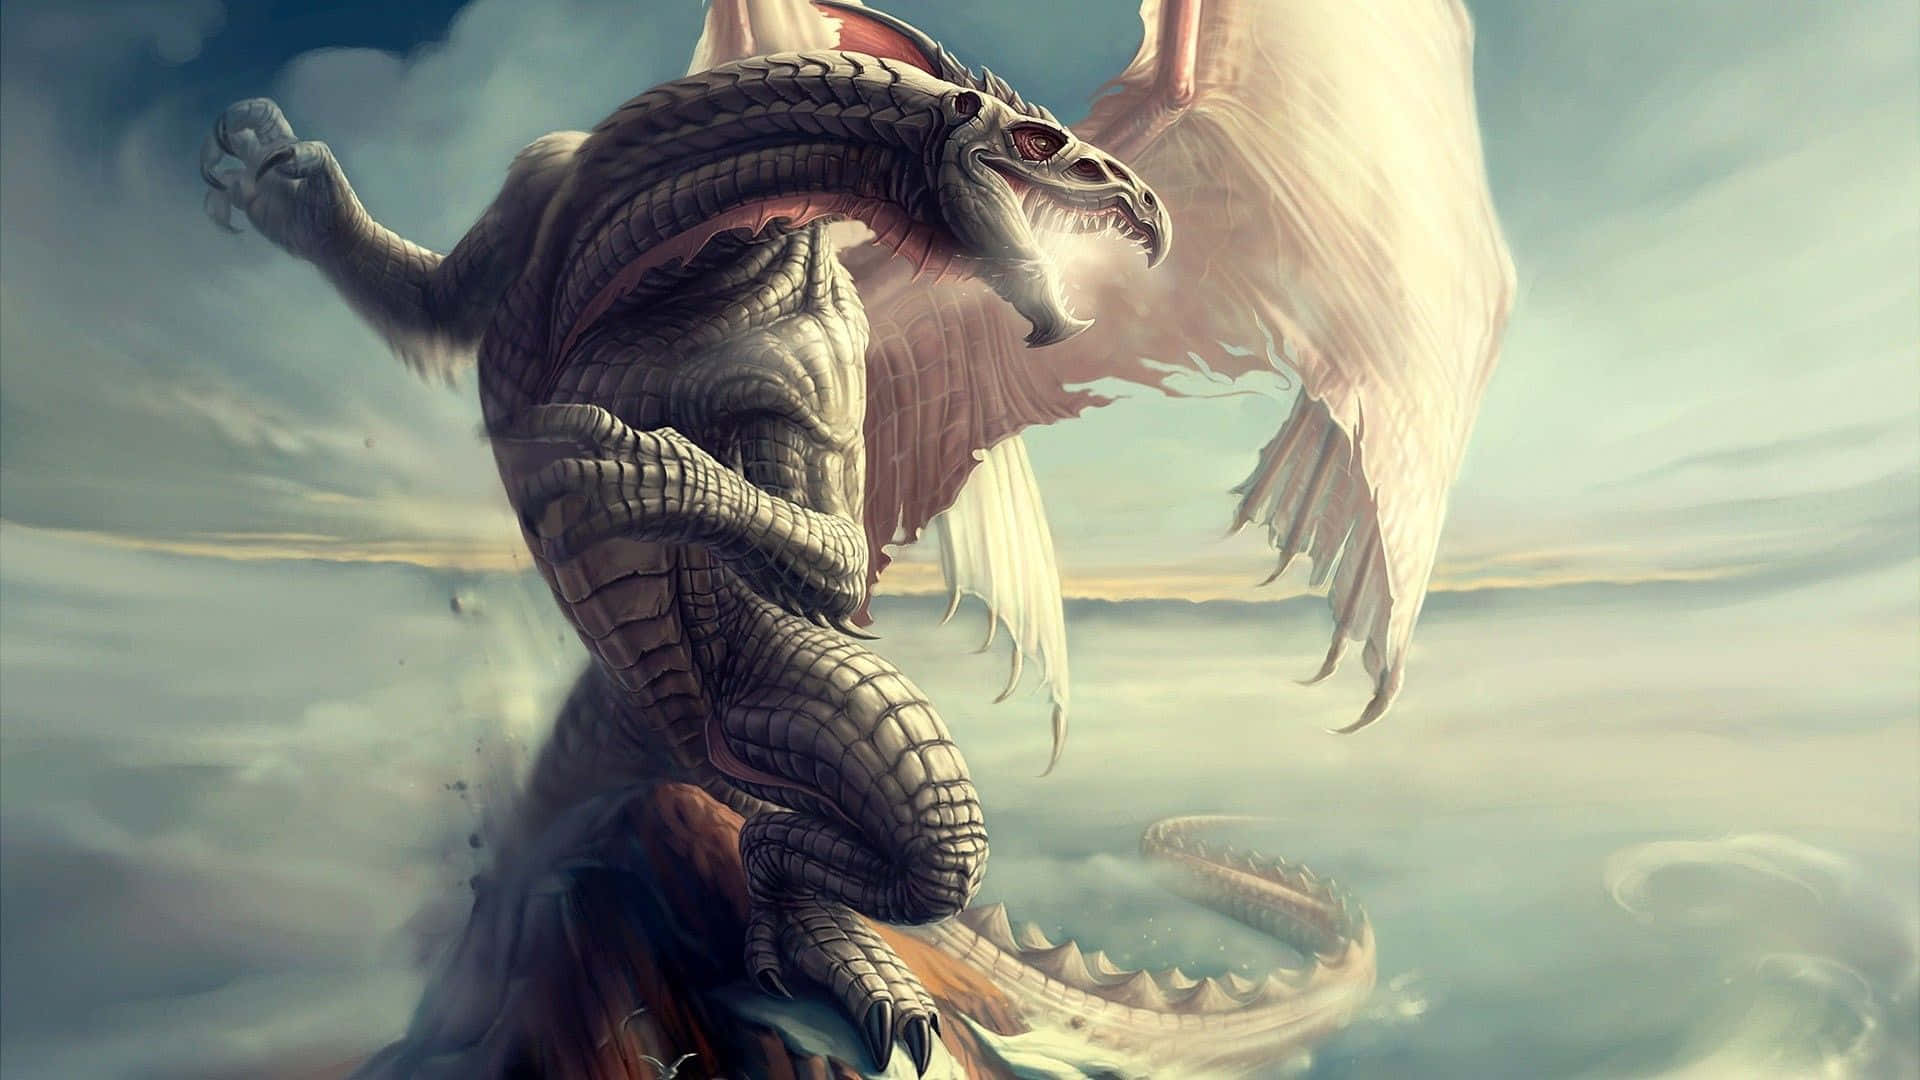 Witness the ferocious power of the Epic Dragon Wallpaper